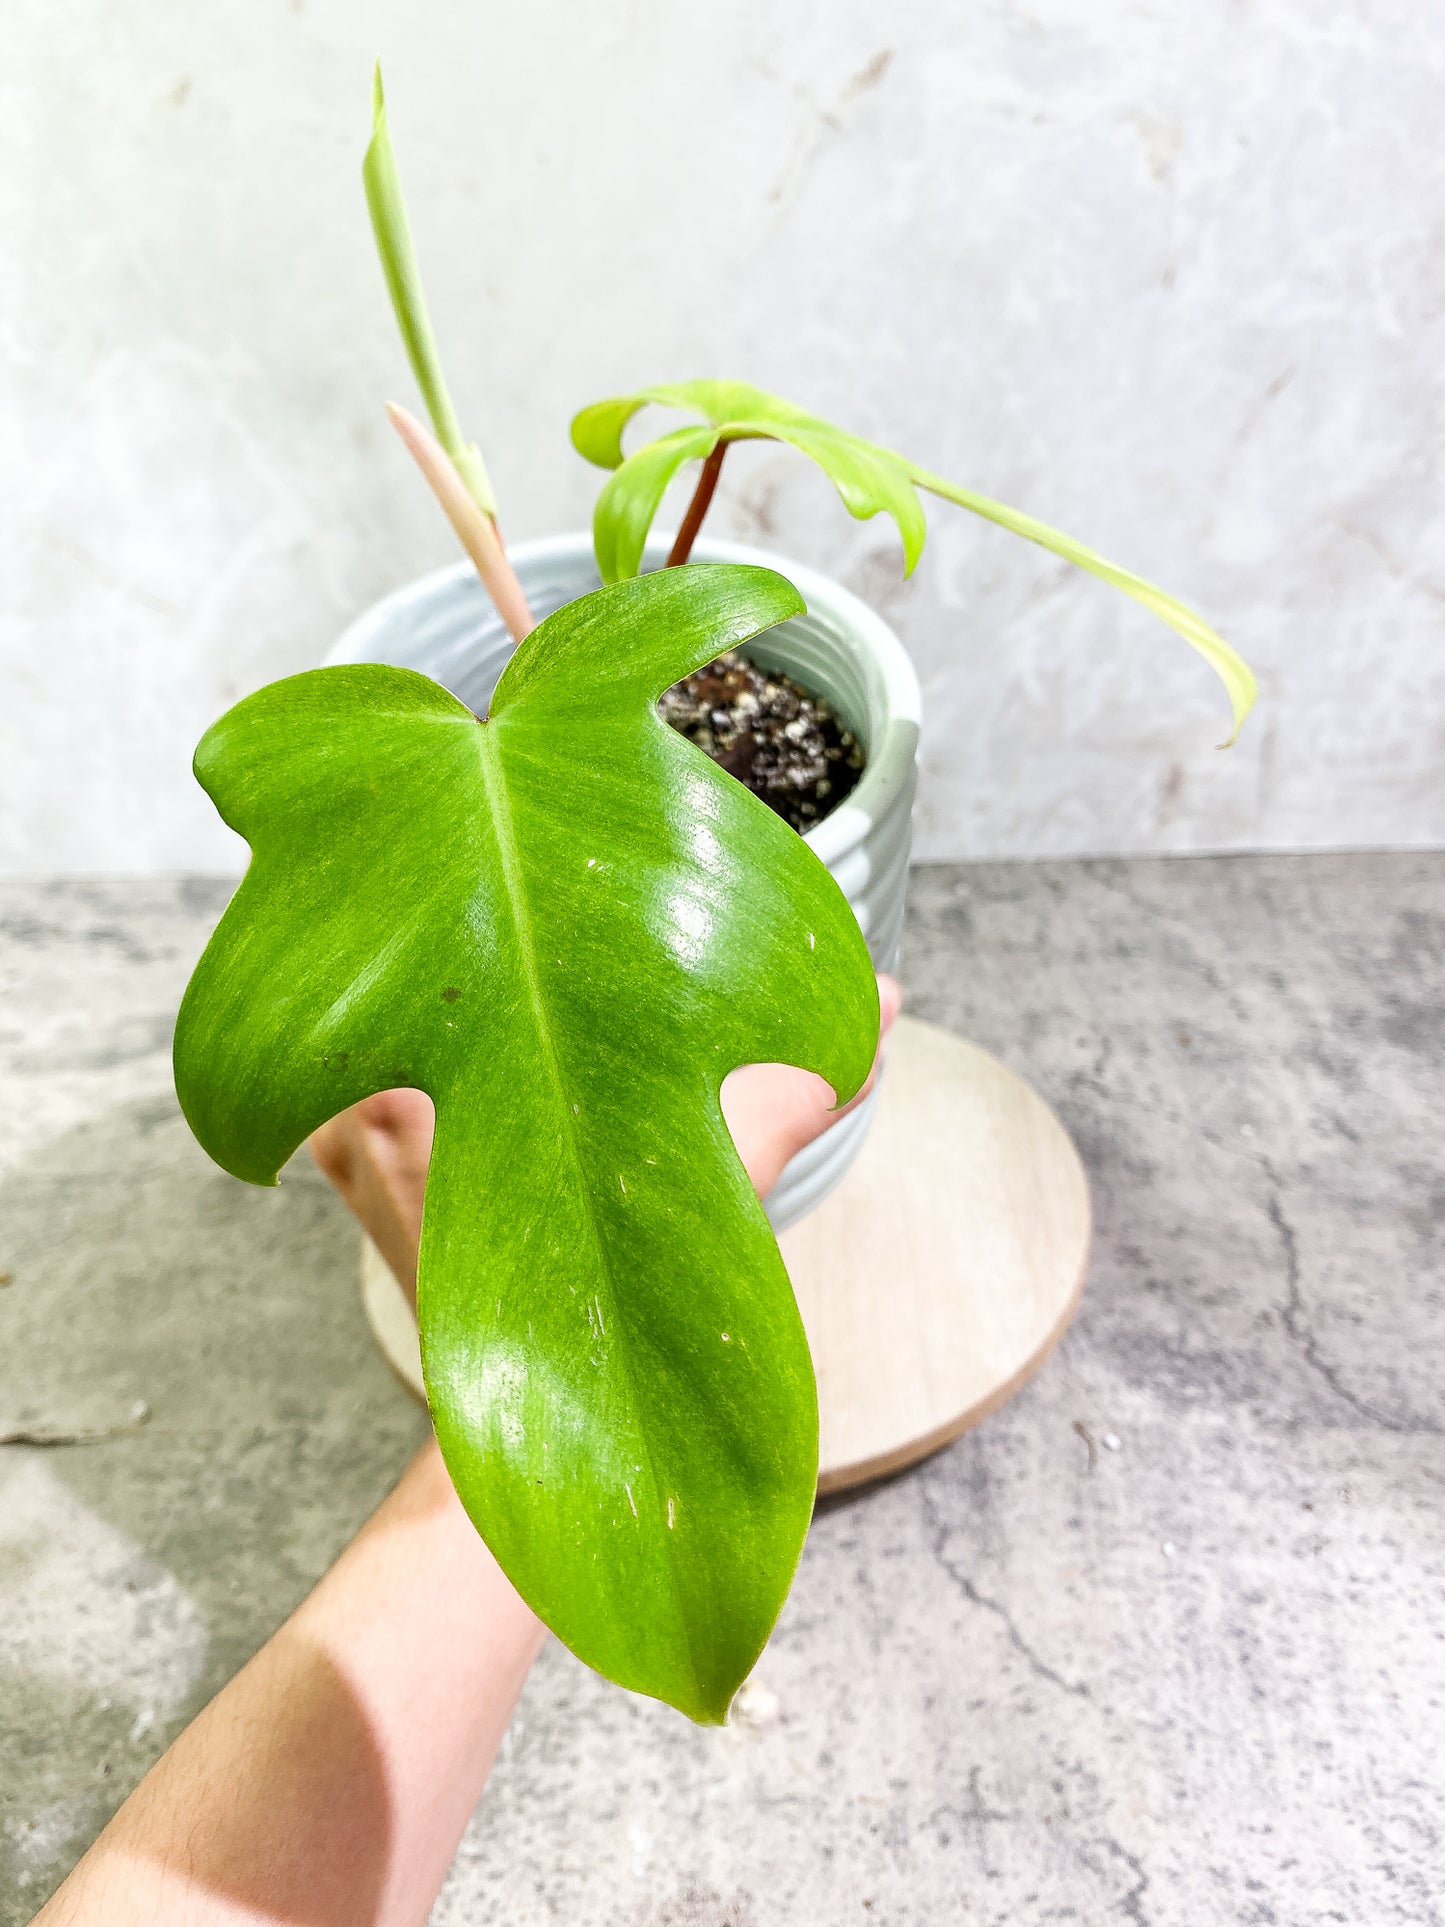 Philodendron Florida Ghost Mint 2 leaves 1 unfurling leaf Rooted